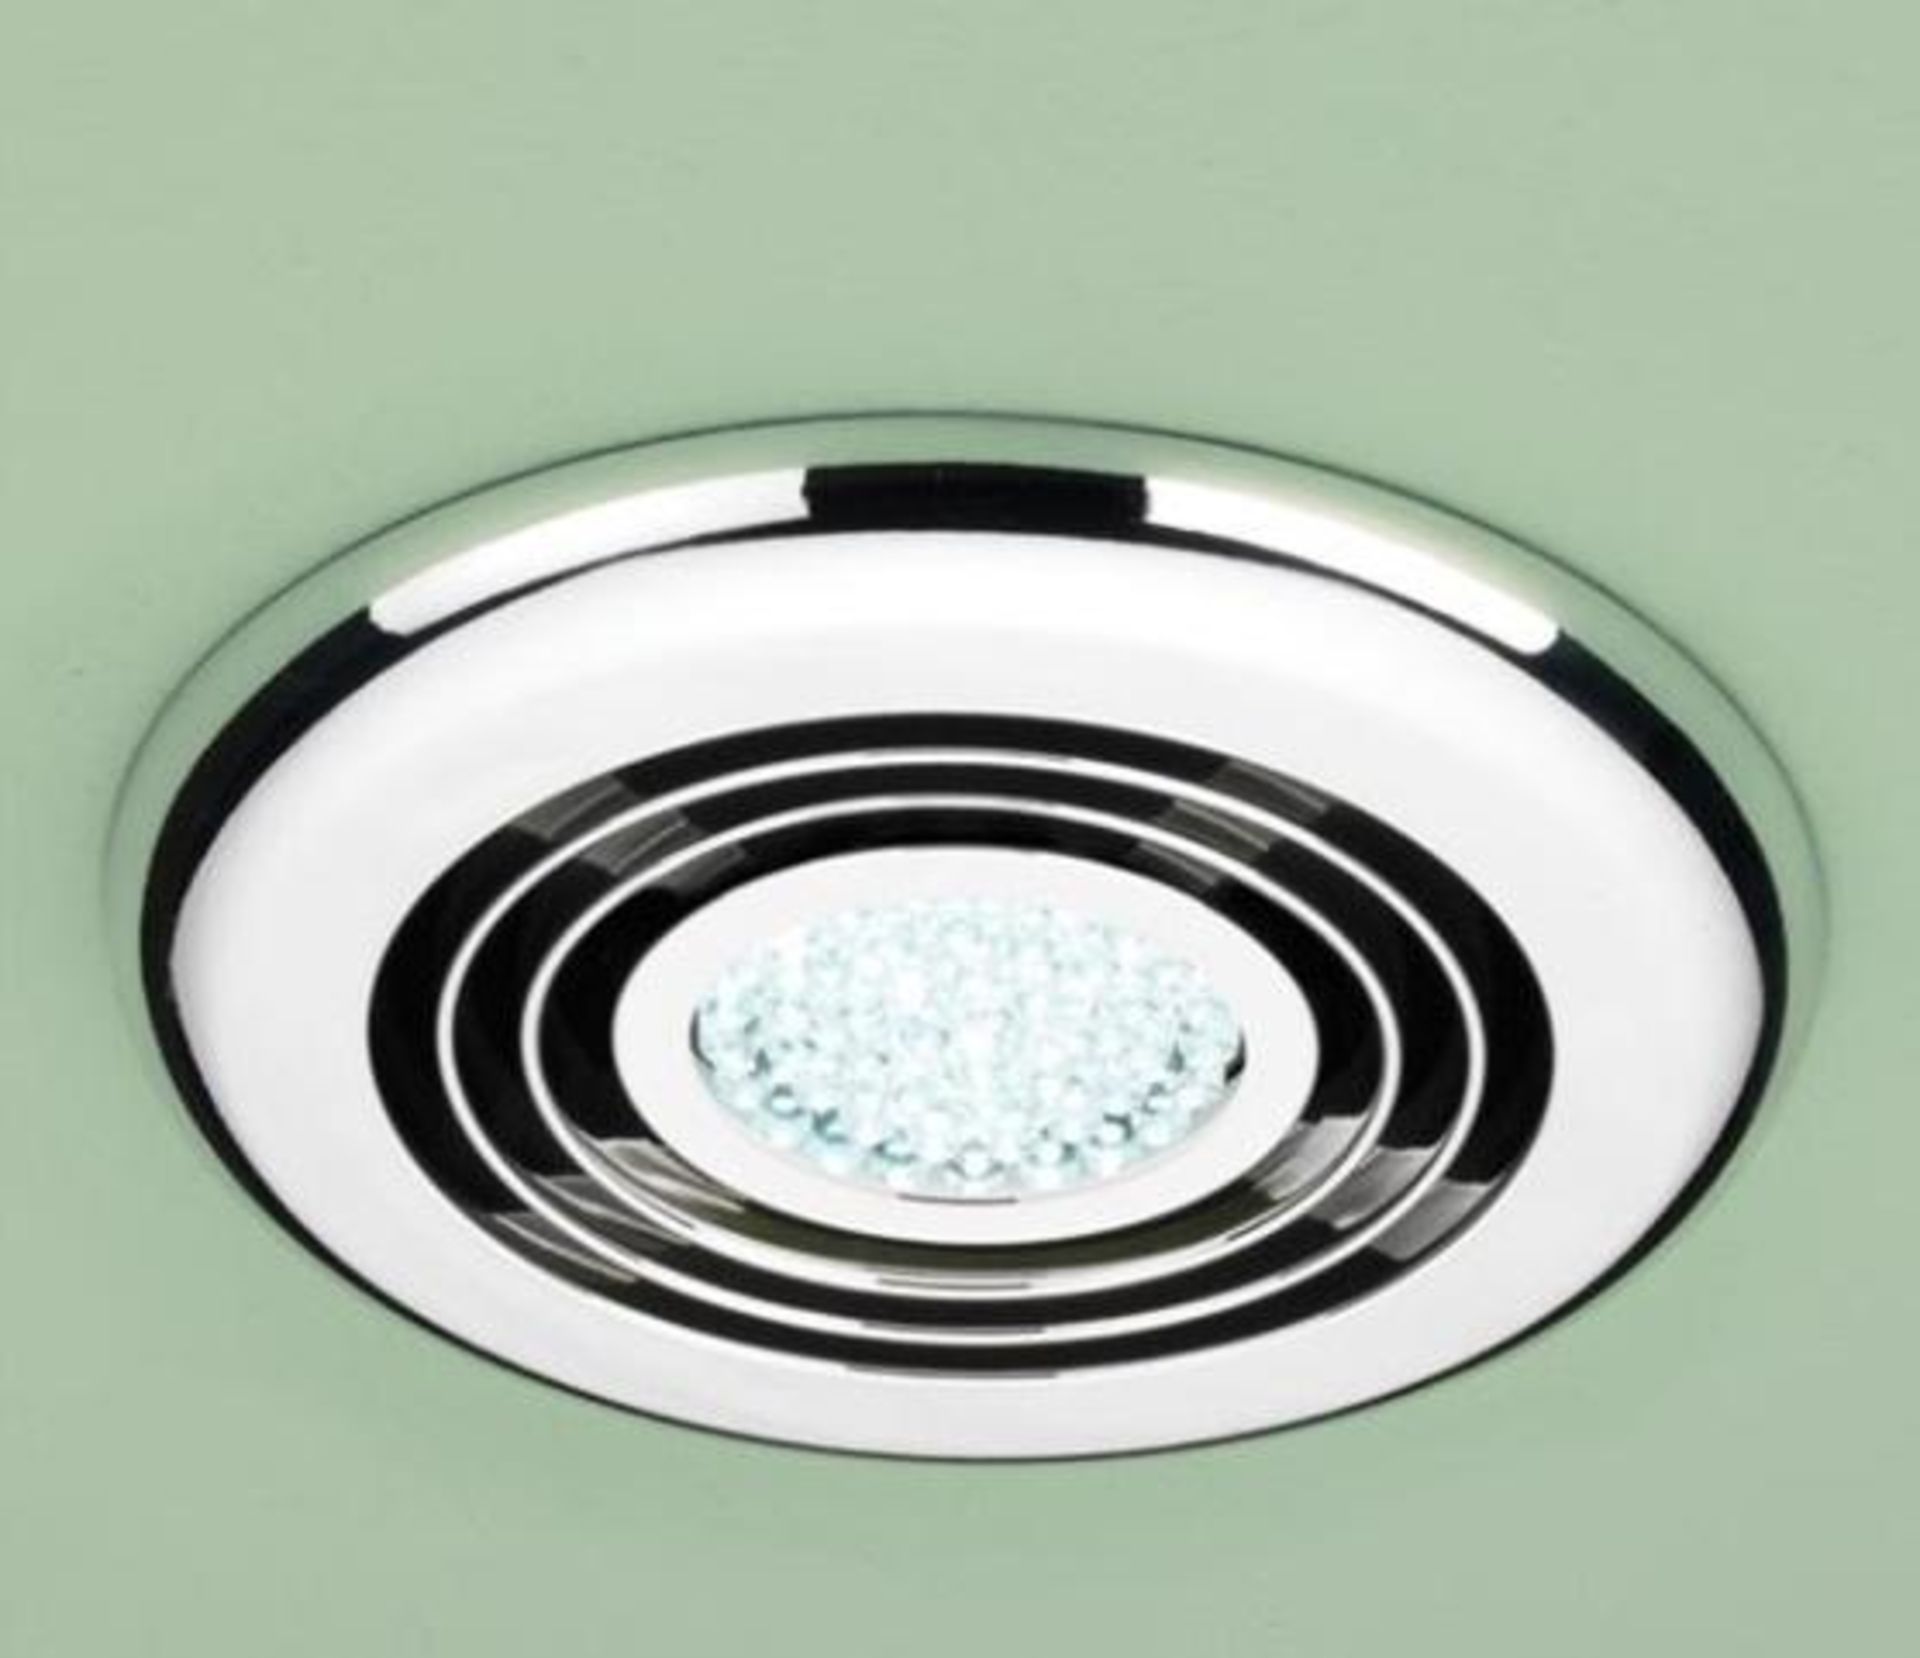 1 x Cyclone, Cool White LED, Chrome Shower Light With Inbuilt Fan - Ex Display Stock - CL323 - Ref: